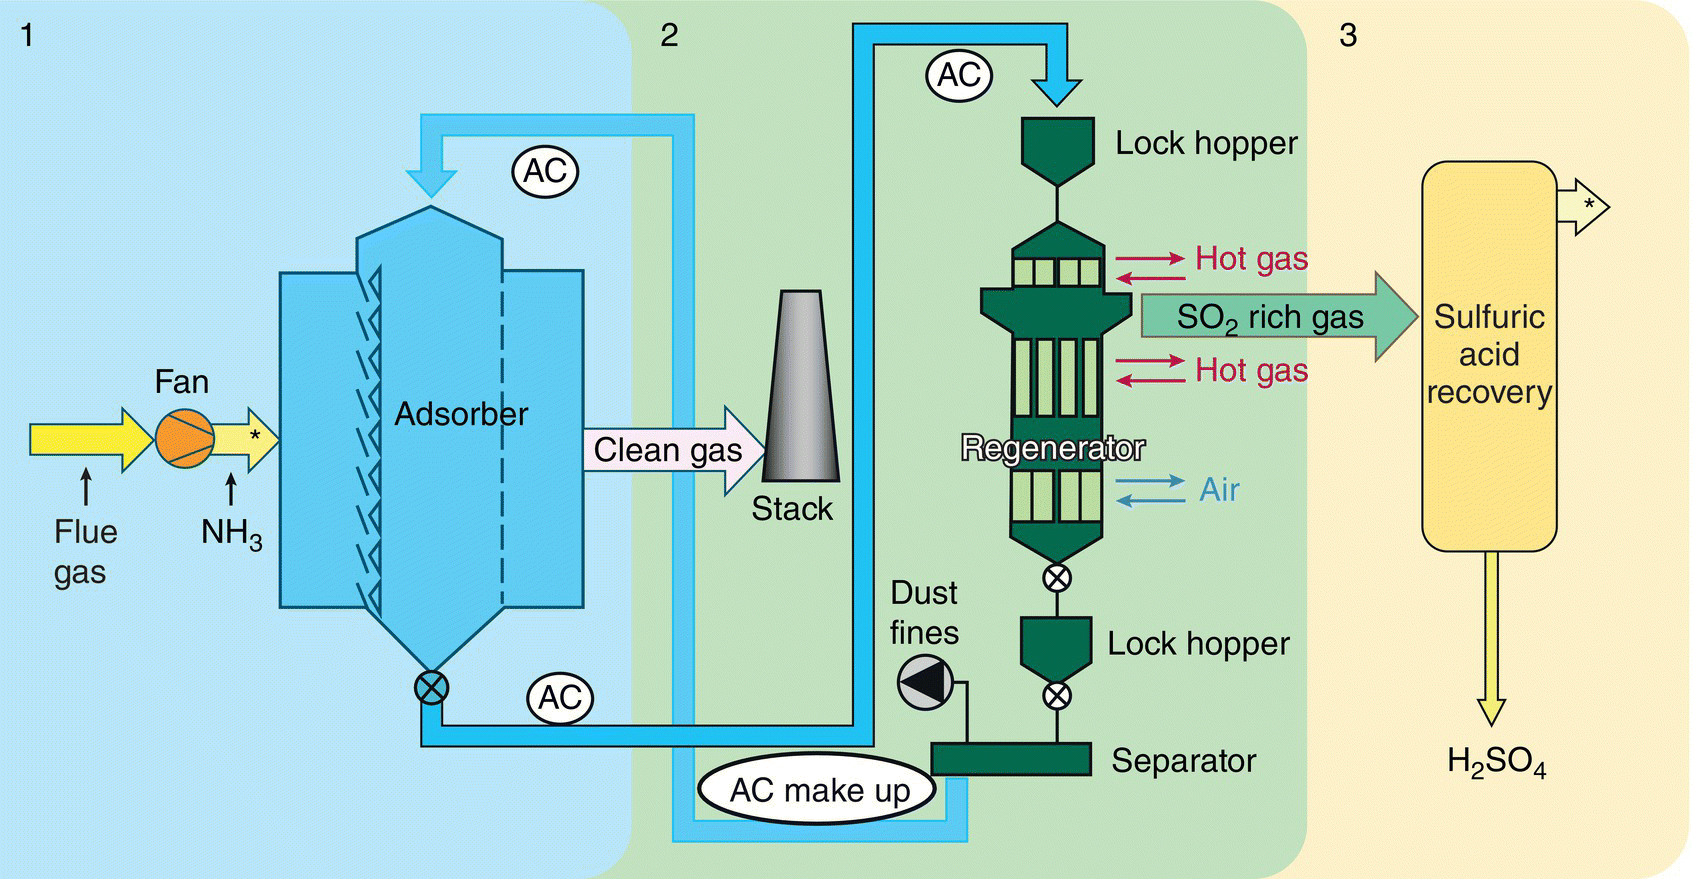 Schematic diagram with three panels, consisting of a fan, adsorber, stack, AC make up, dust fines, lock hopper, regenerator, lock hopper, separator, and sulfuric acid recovery.